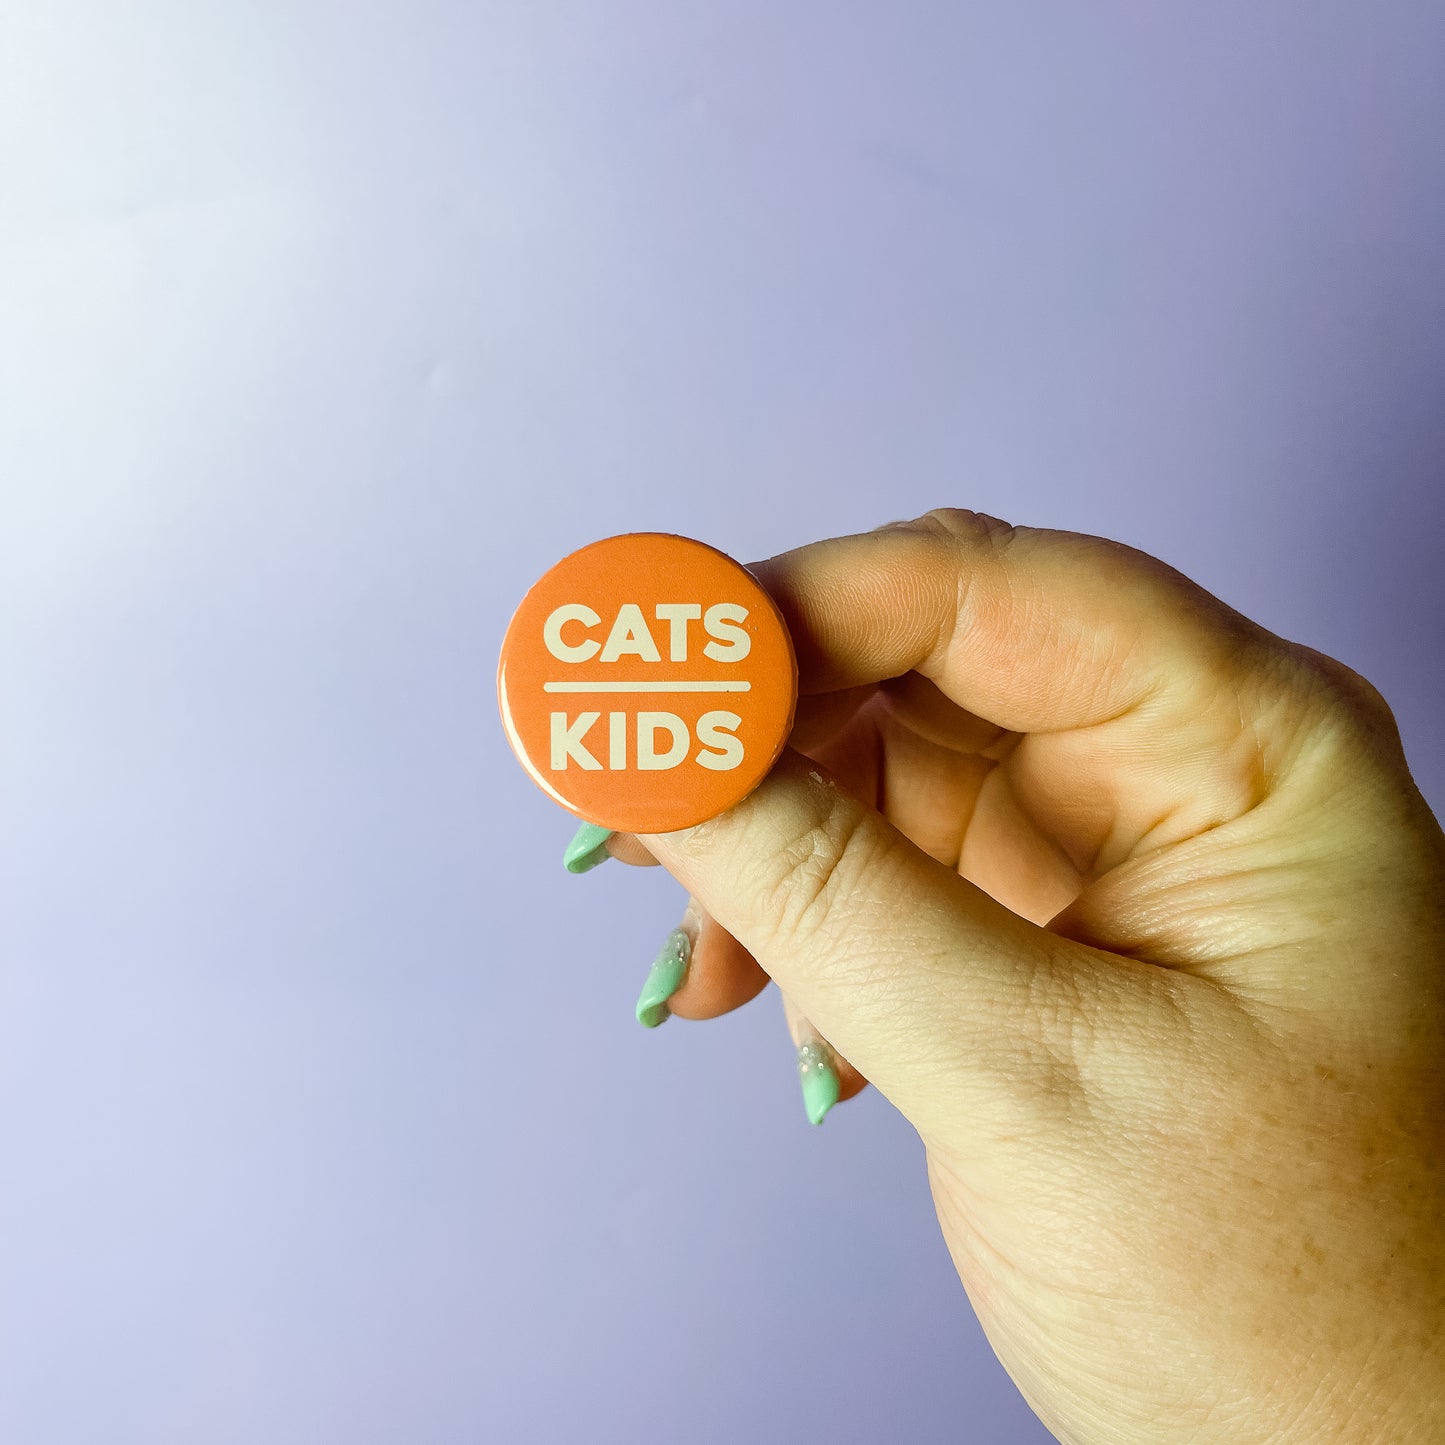 Cats over Kids - Button